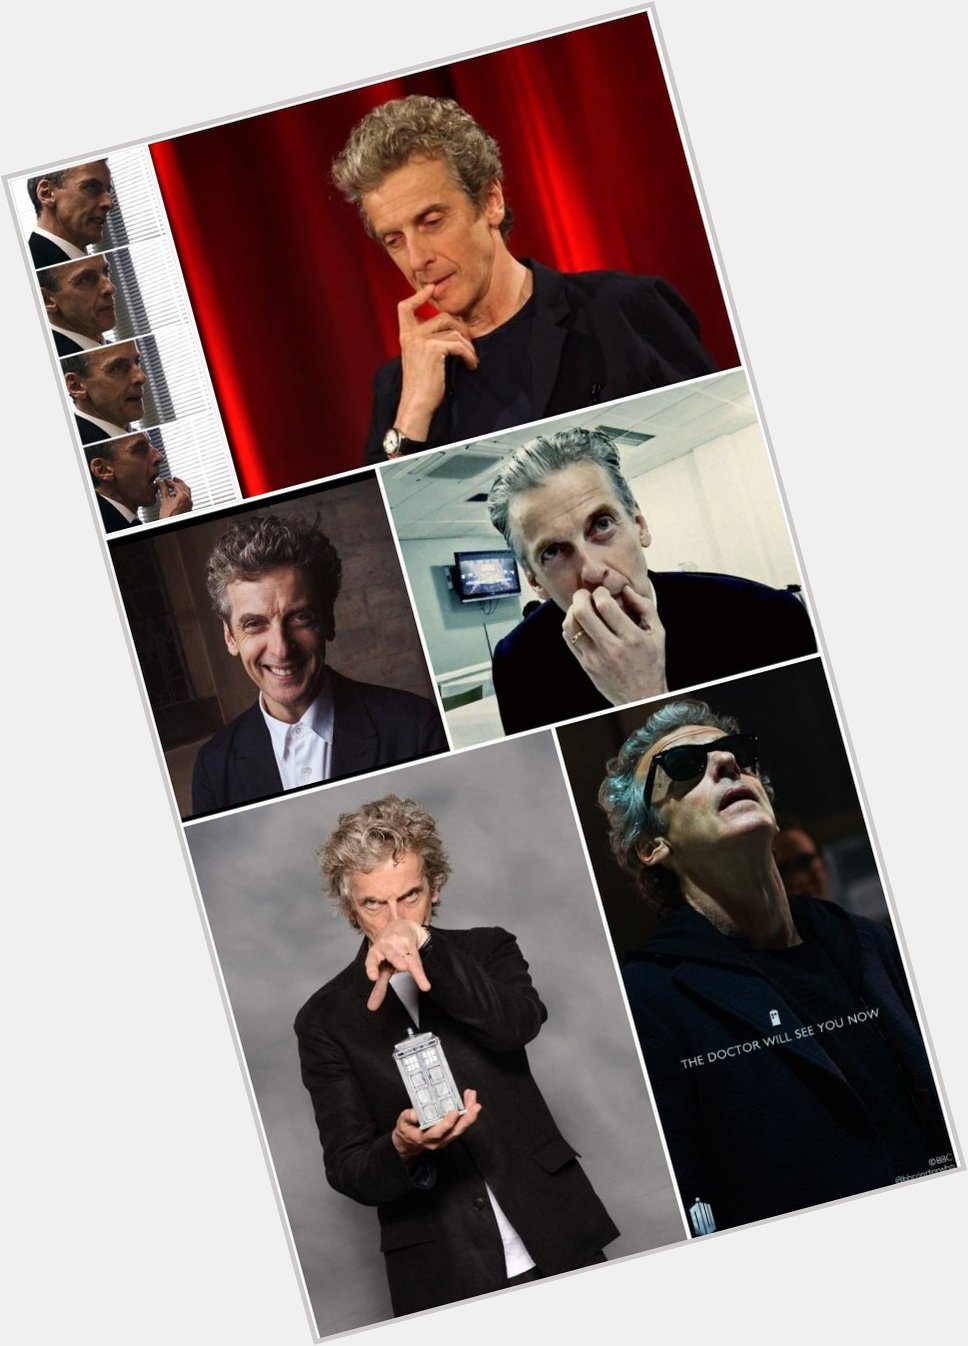 Happy birthday to my most favorite person in this world, peter capaldi!!!         